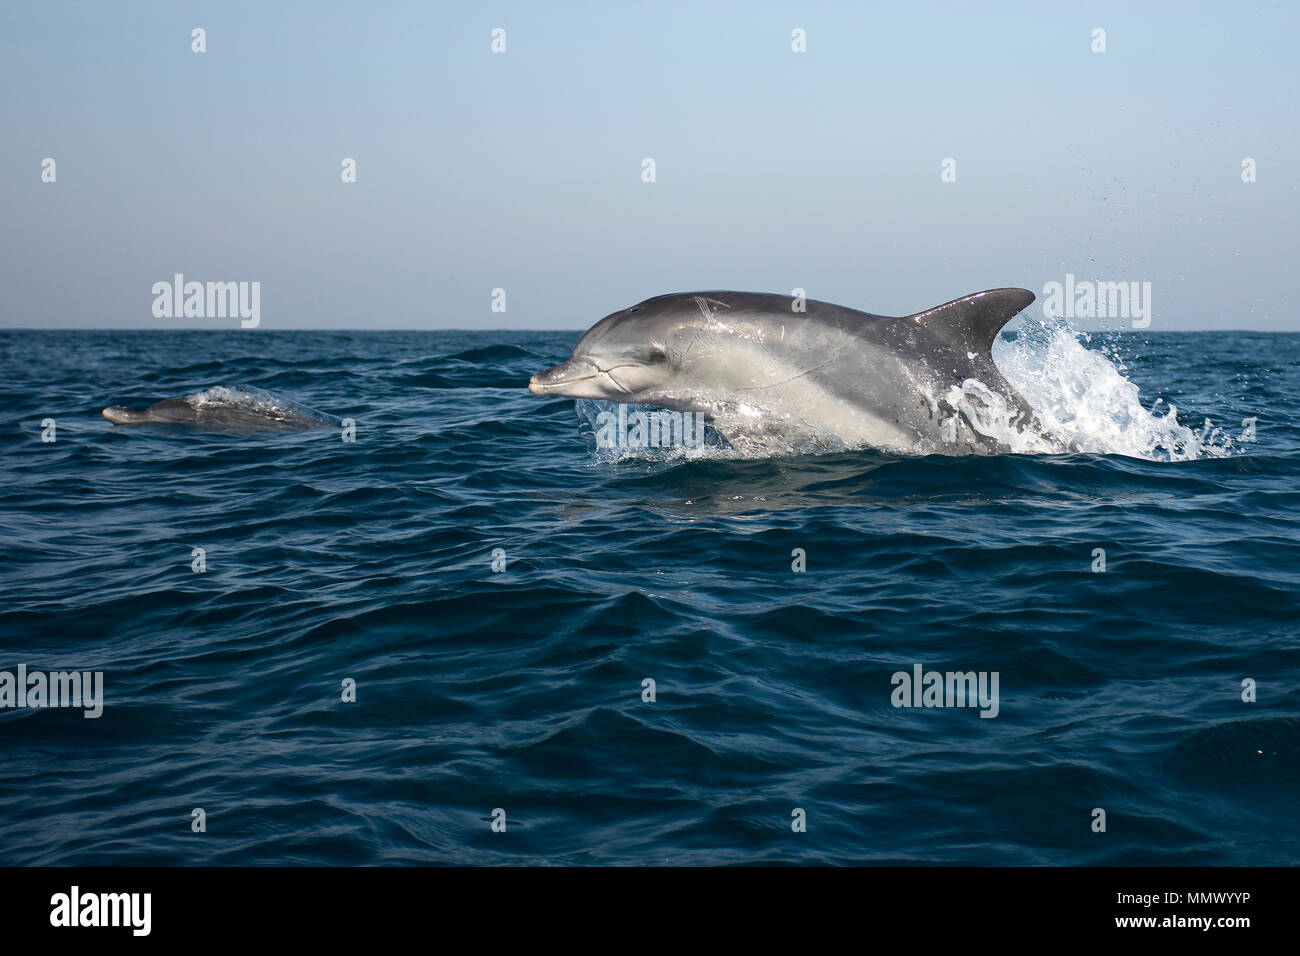 Common bottlenose dolphins, Tursiops truncatus, Coffee Bay, Eastern Cape Wild Coast, South Africa, Indian Ocean Stock Photo